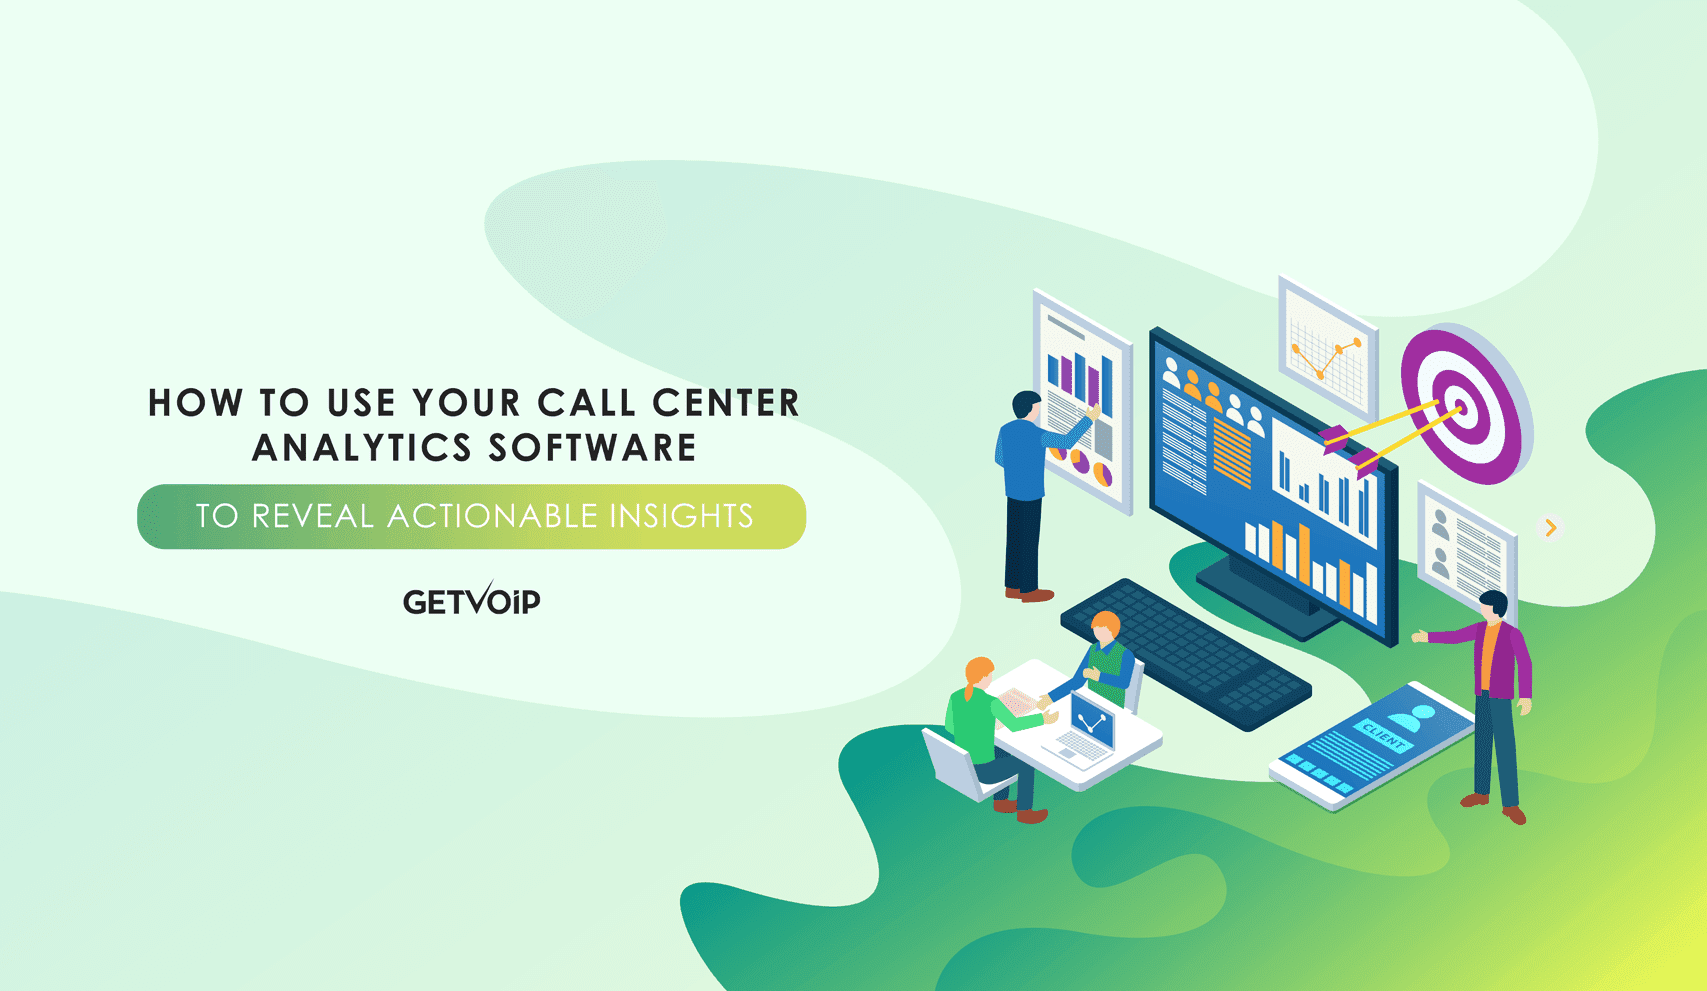 How to Use Your Call Center Analytics Software to Reveal Actionable Insights